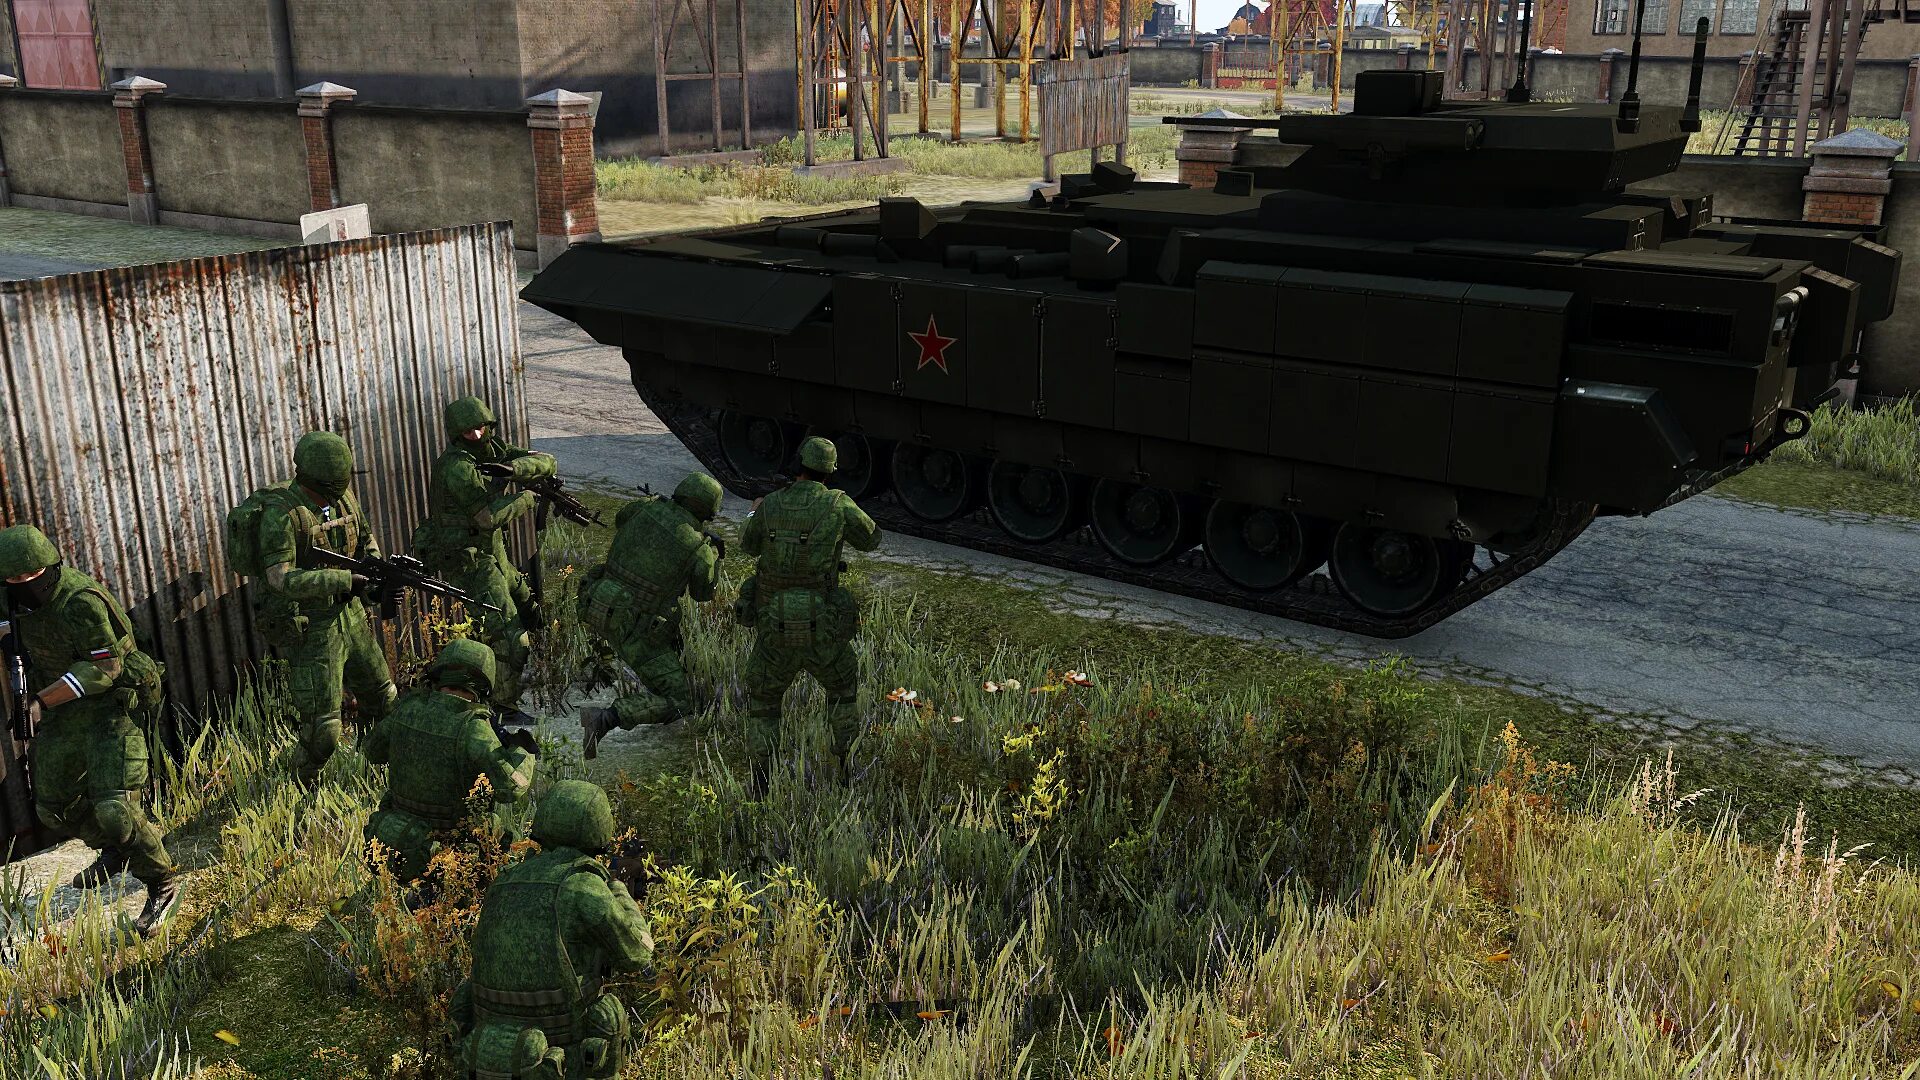 Арма 3 моды русские. Arma 3 армия РФ. Арма 3 Russian Armed Forces 2035. Арма 3 армия России 2035. Arma 3 Russian Army 2035.